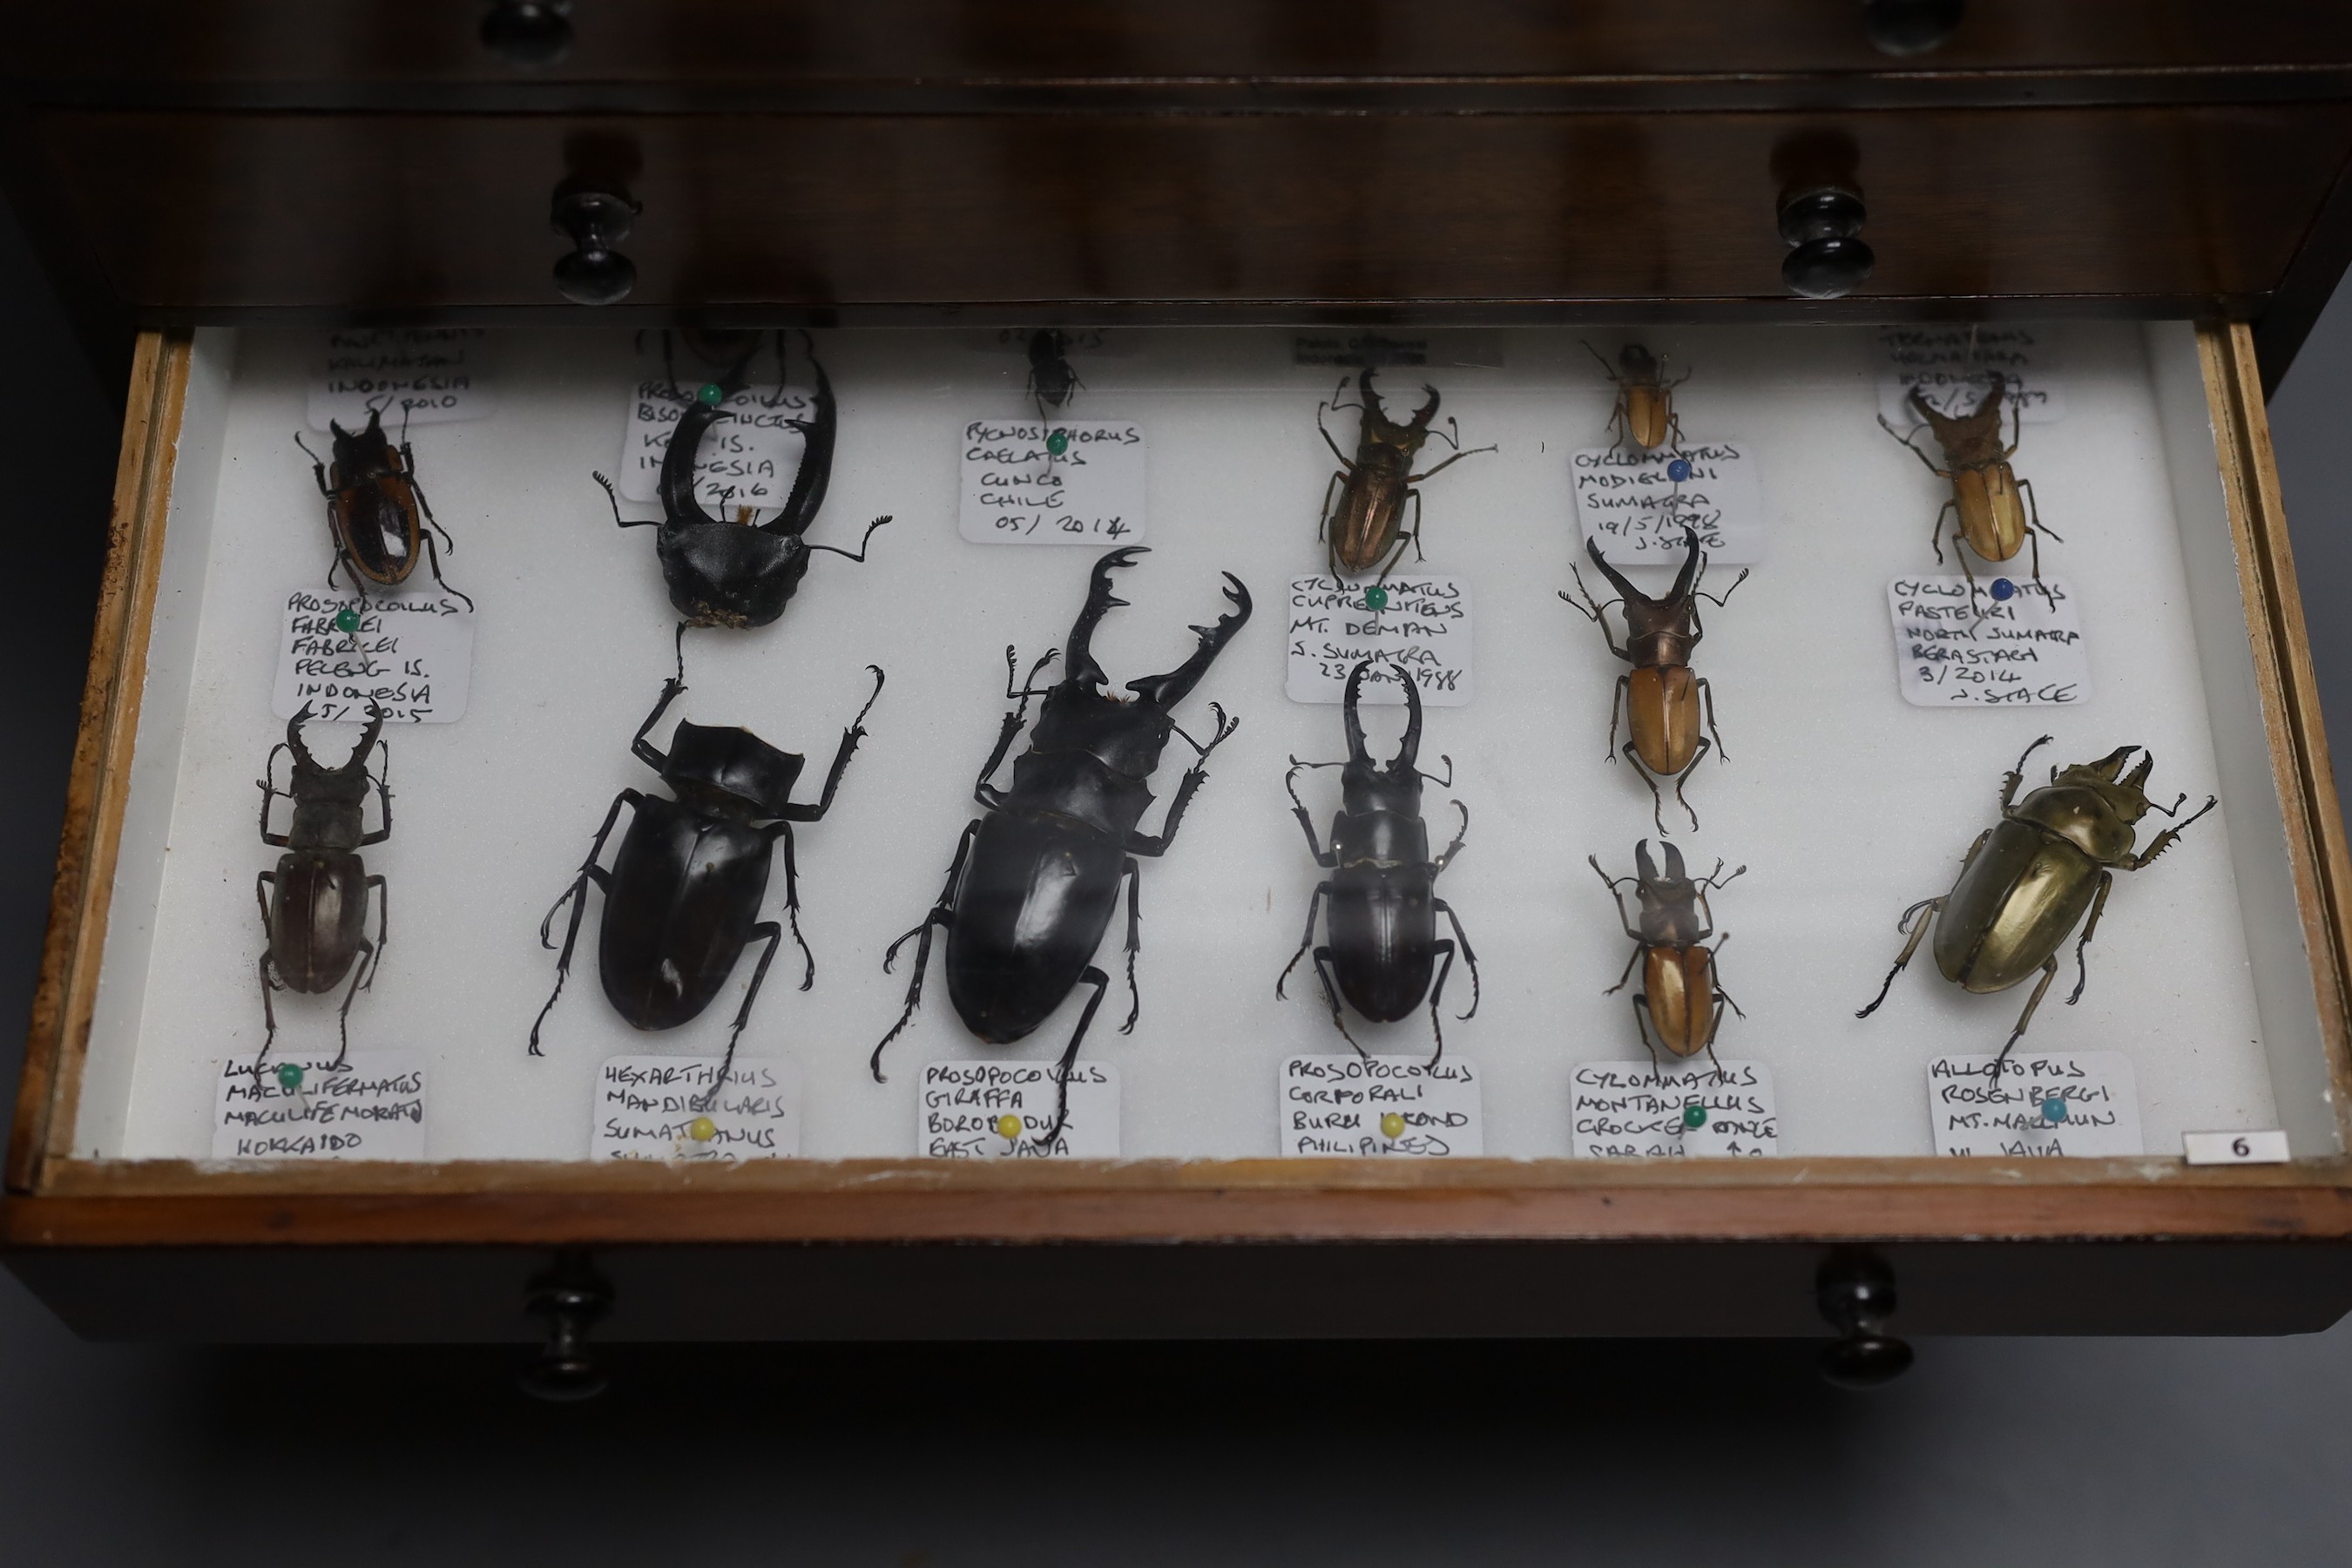 Entomology - a collection of beetle specimens, in an eight drawer collector's chest, 53 cm high, 40.5 cm wide, 28 cm deep